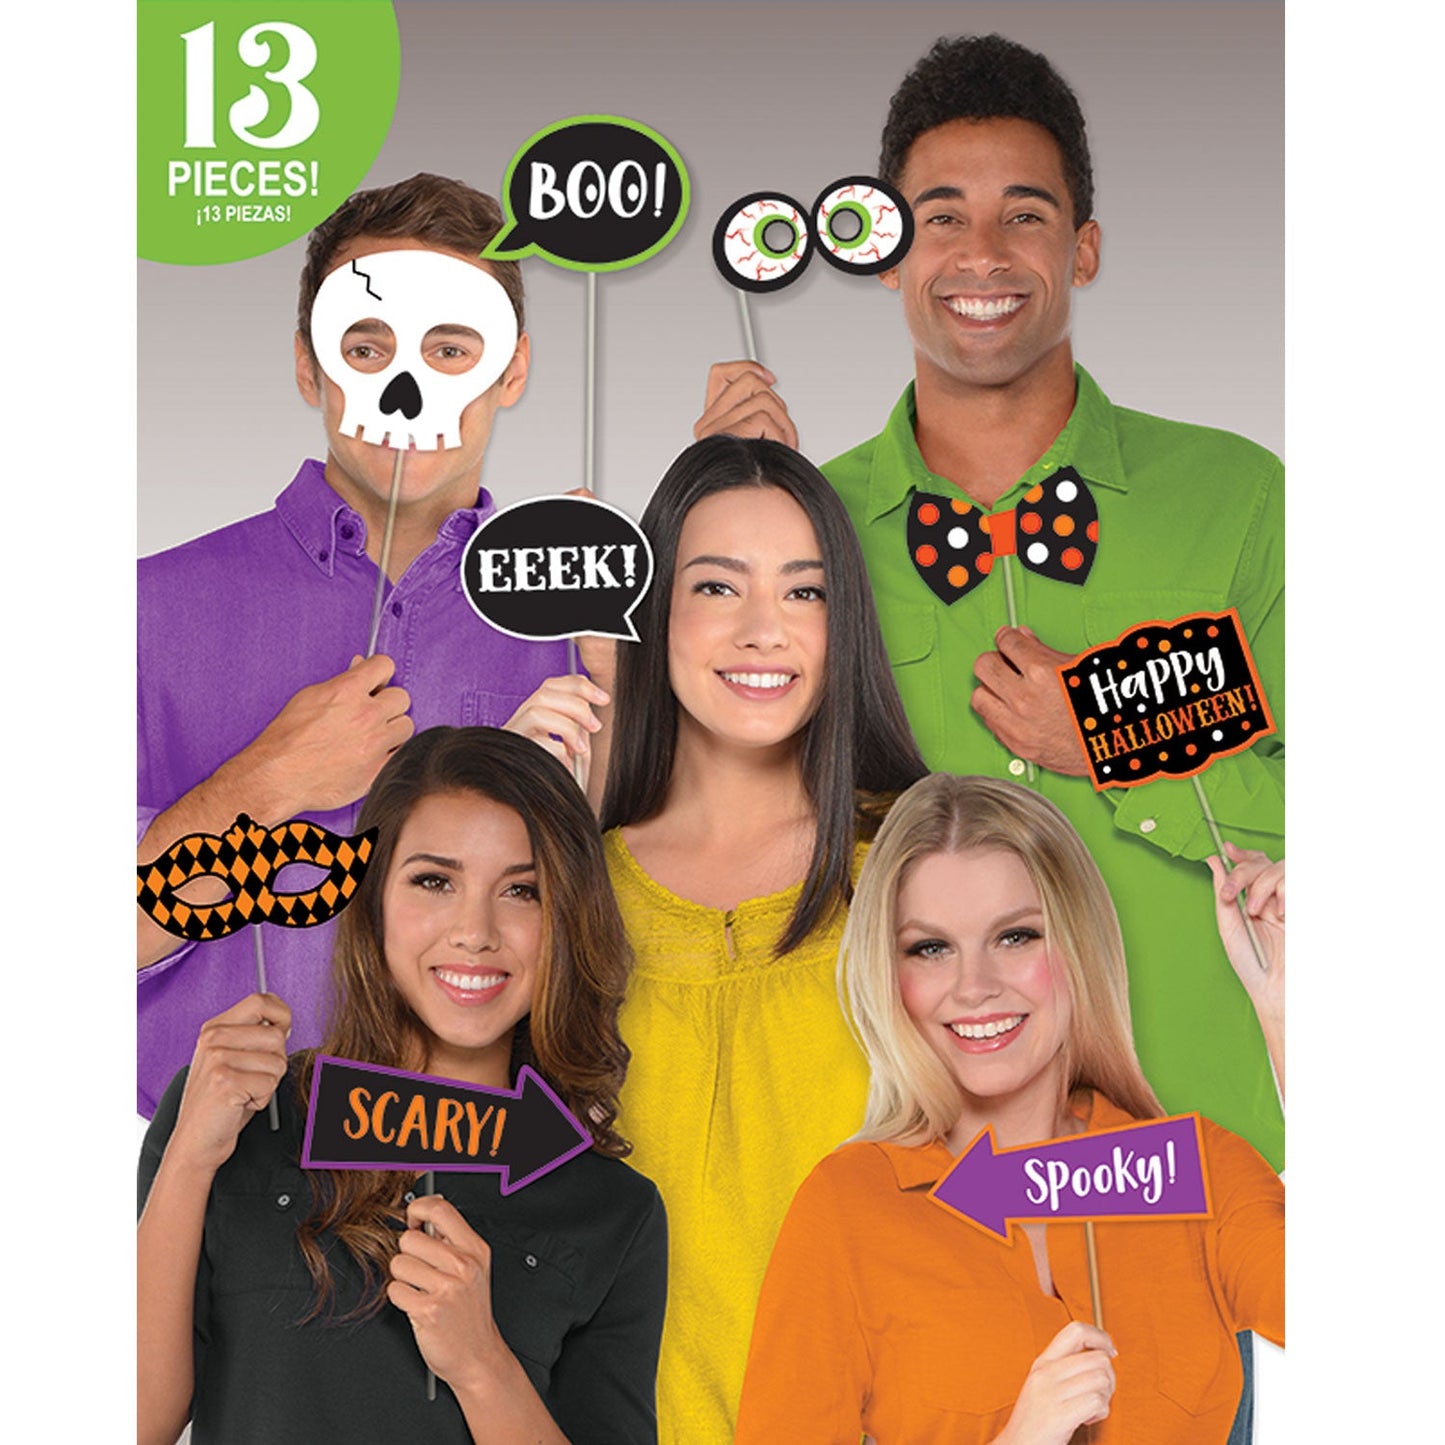 Witches Crew Photo Prop Kit includes 13 assorted photo props